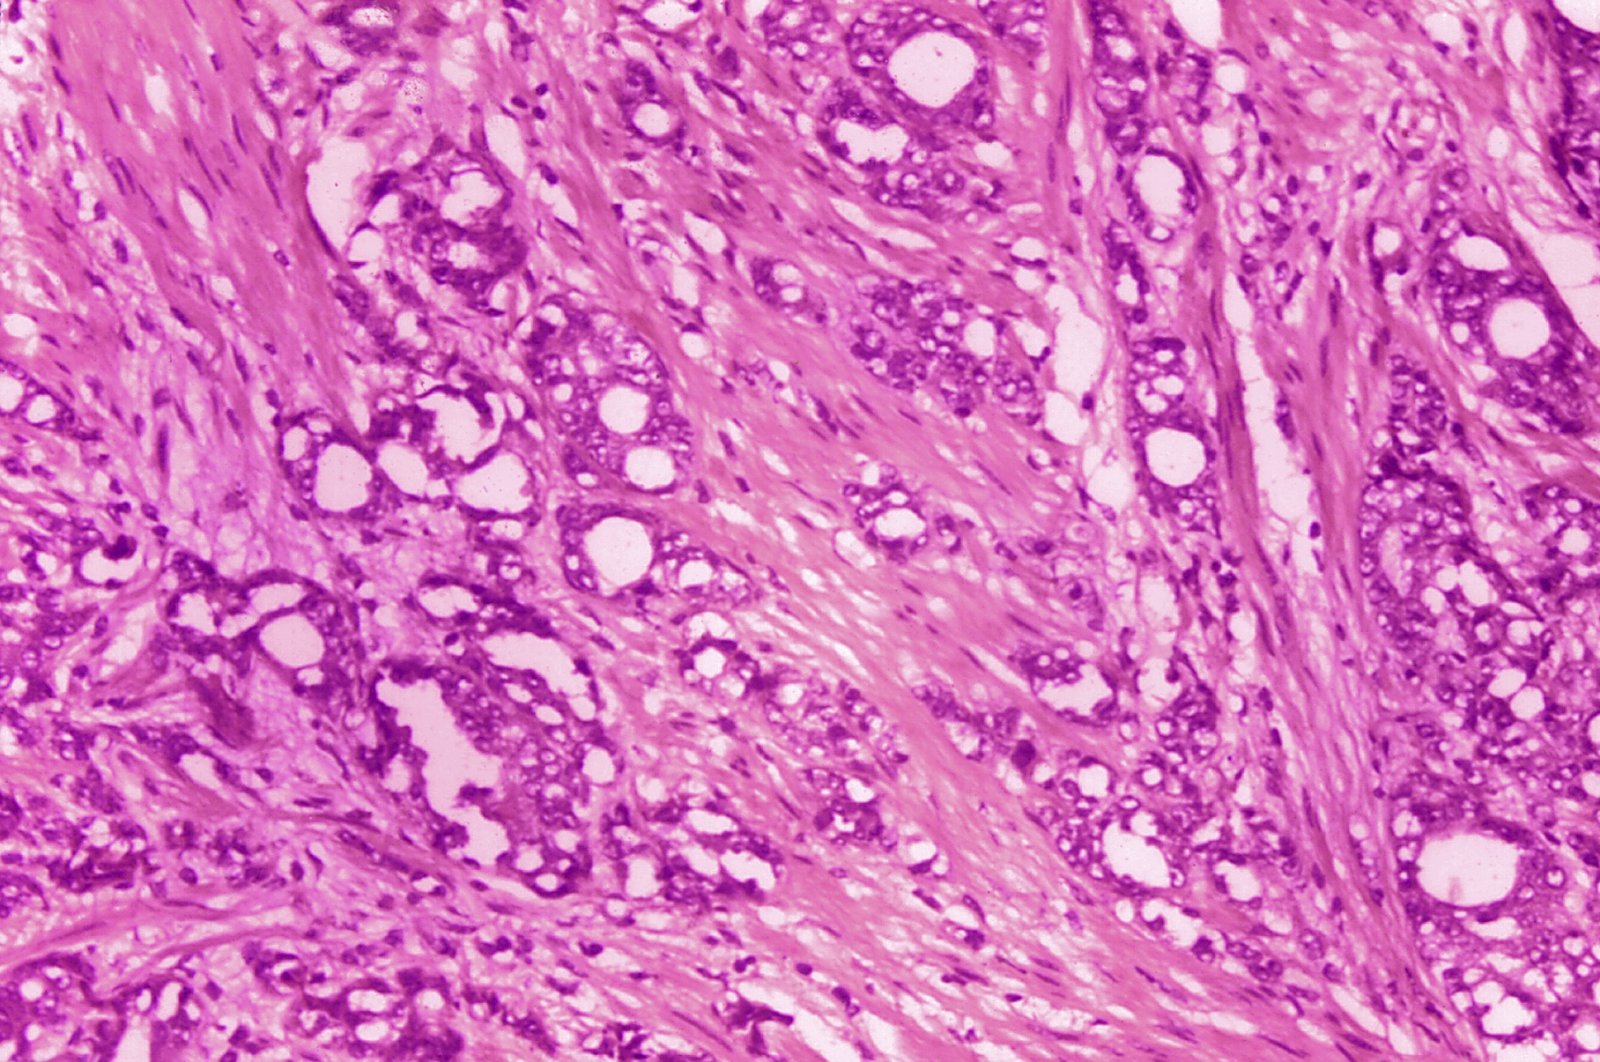 A microscope image shows changes in cells indicative of adenocarcinoma of the prostate. (AP Photo)